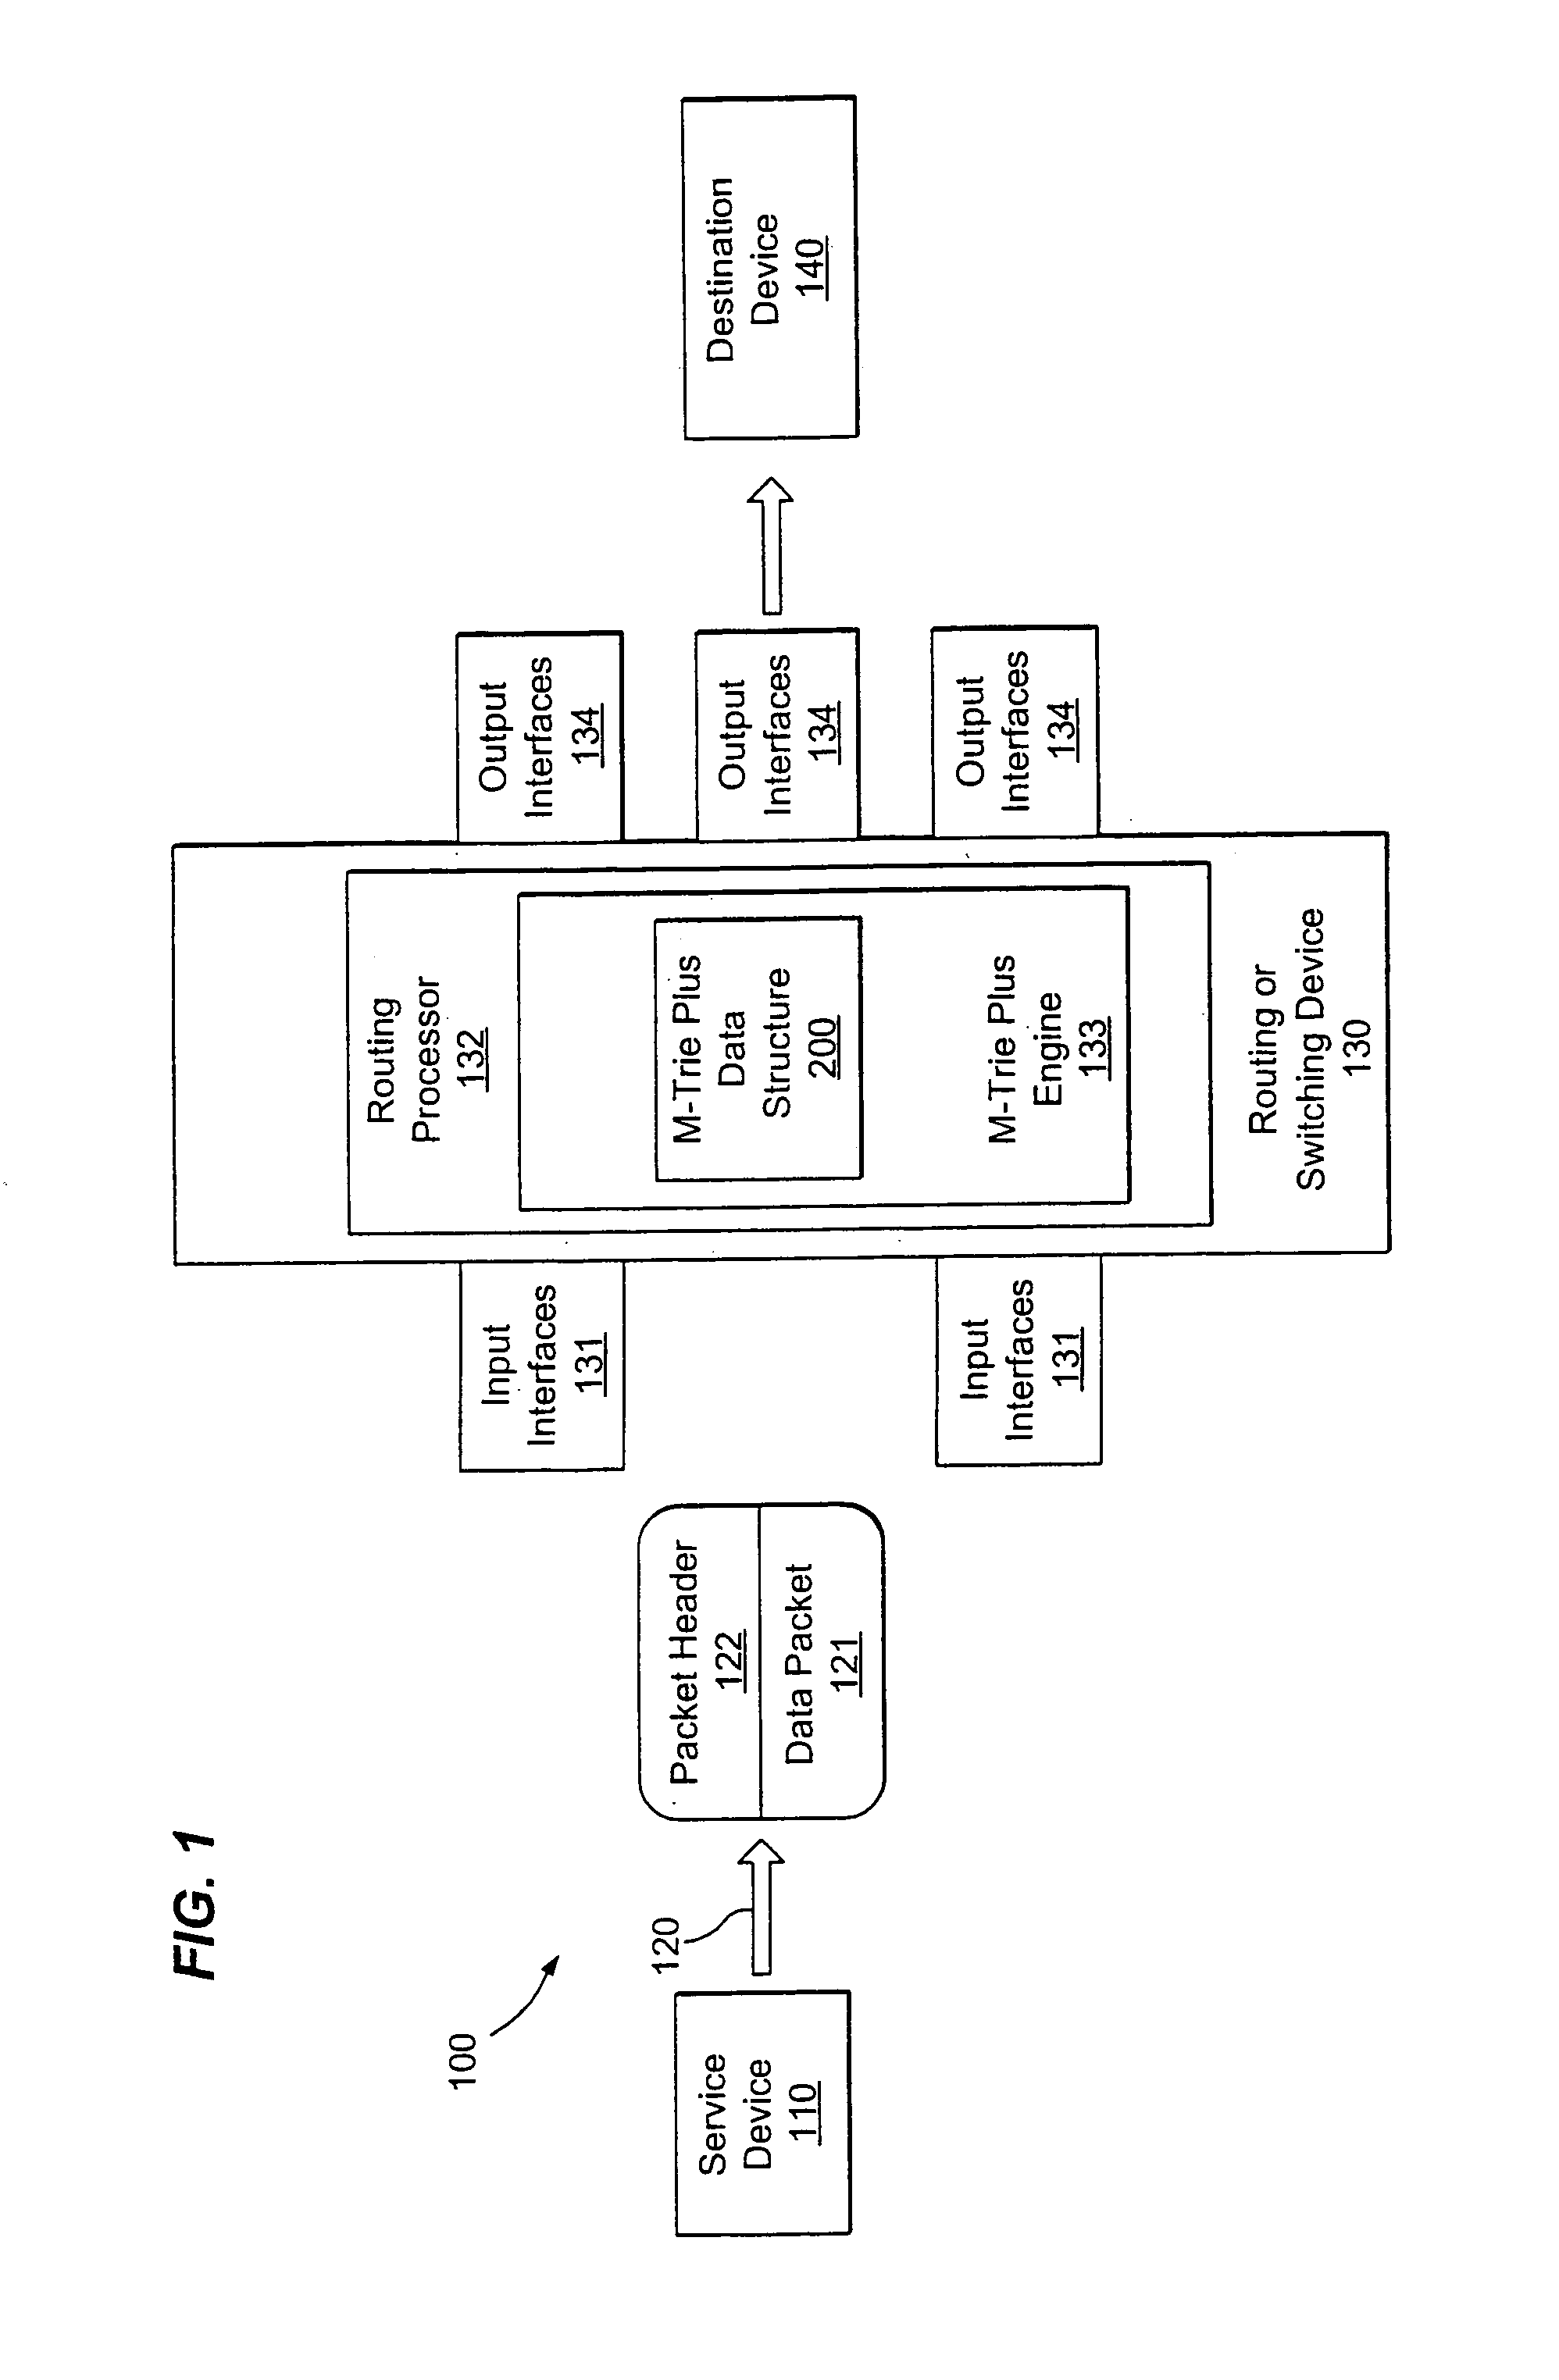 M-trie based packet processing